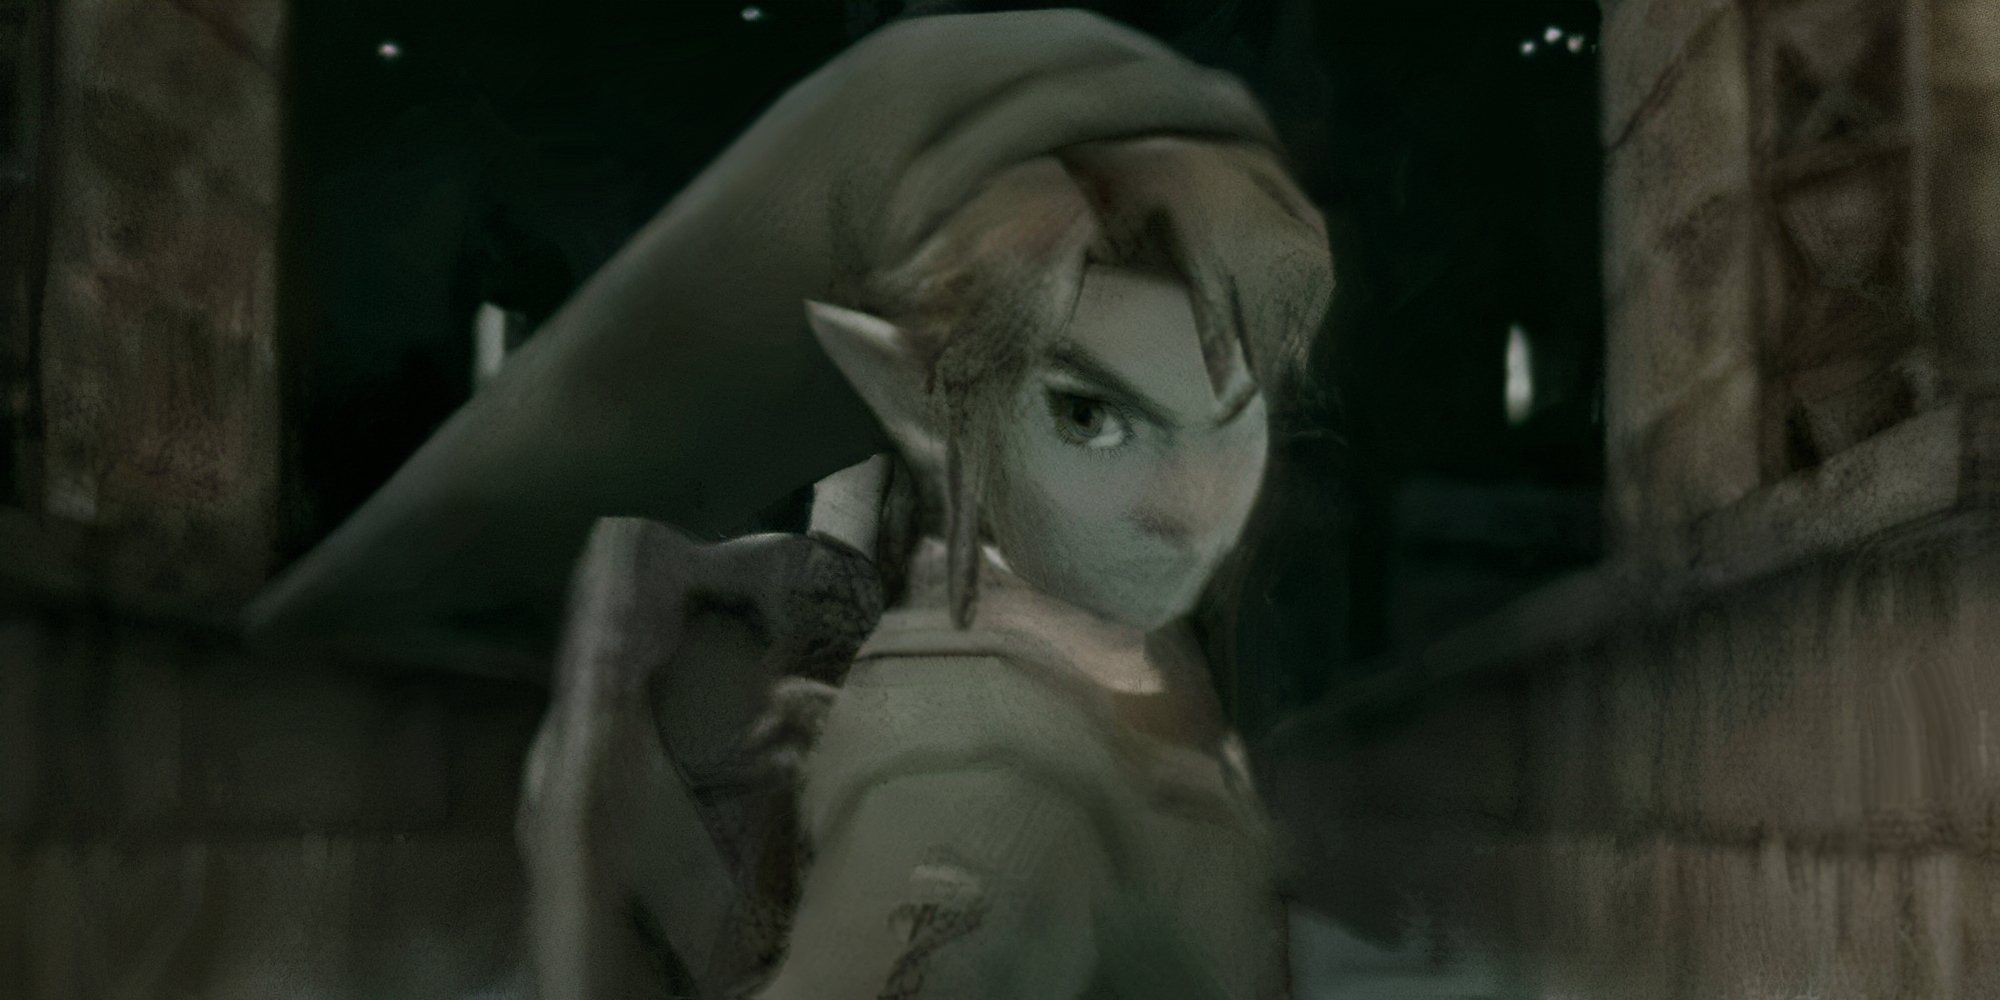 Footage of Link storing his sword at the end of Twilight Princess' E3 2004 trailer.